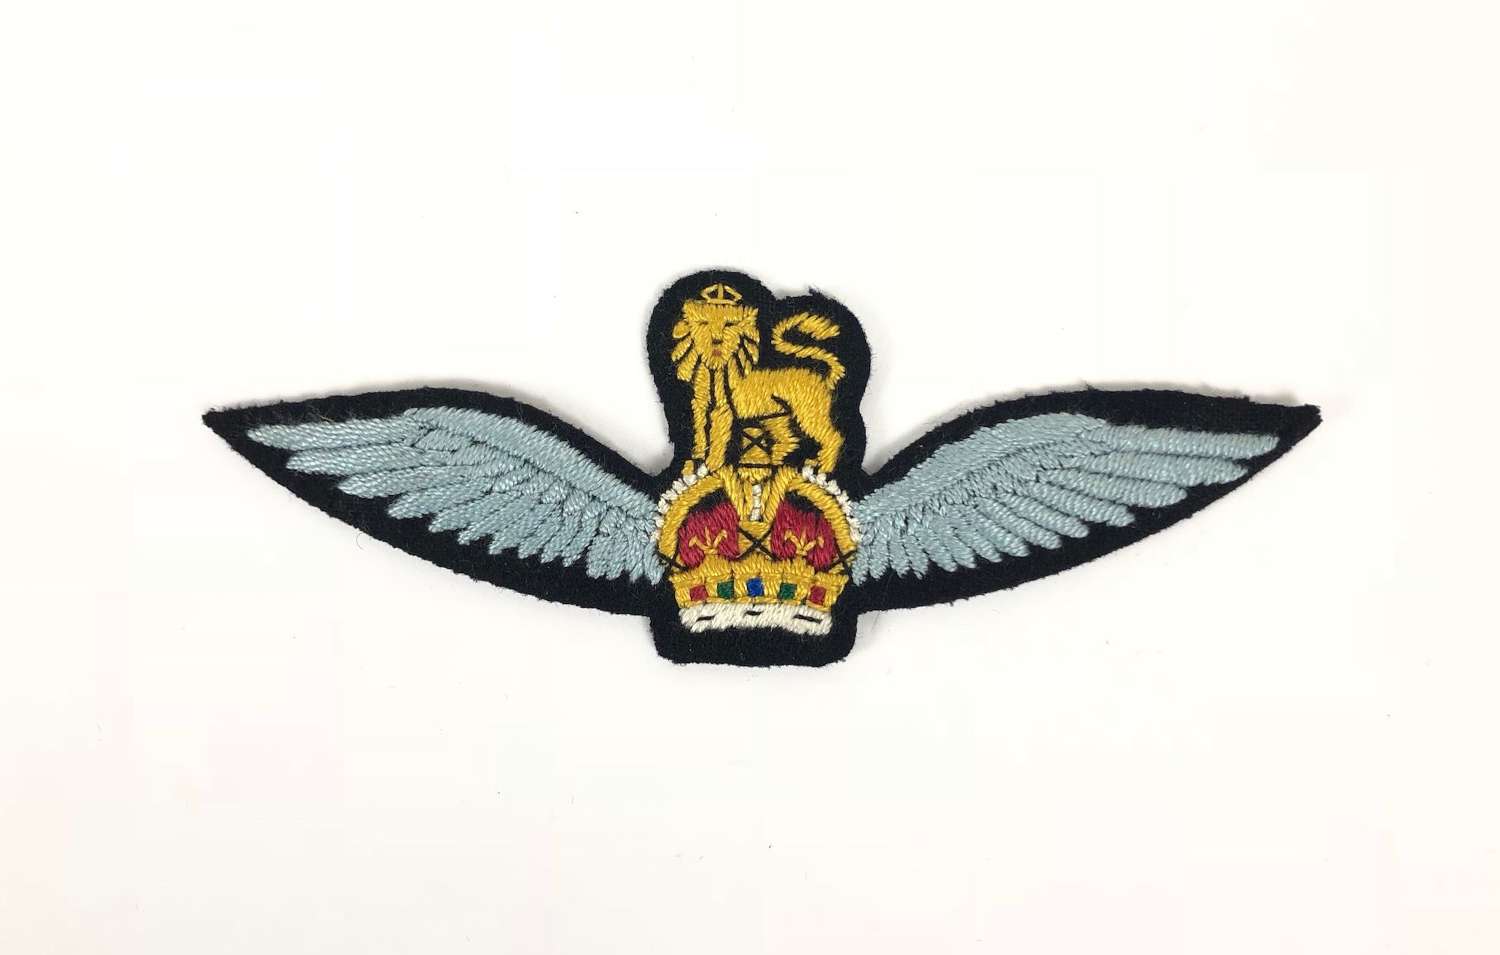 WW2 Period Army Air Corps / Glider Pilot Regiment Pilot Wings.